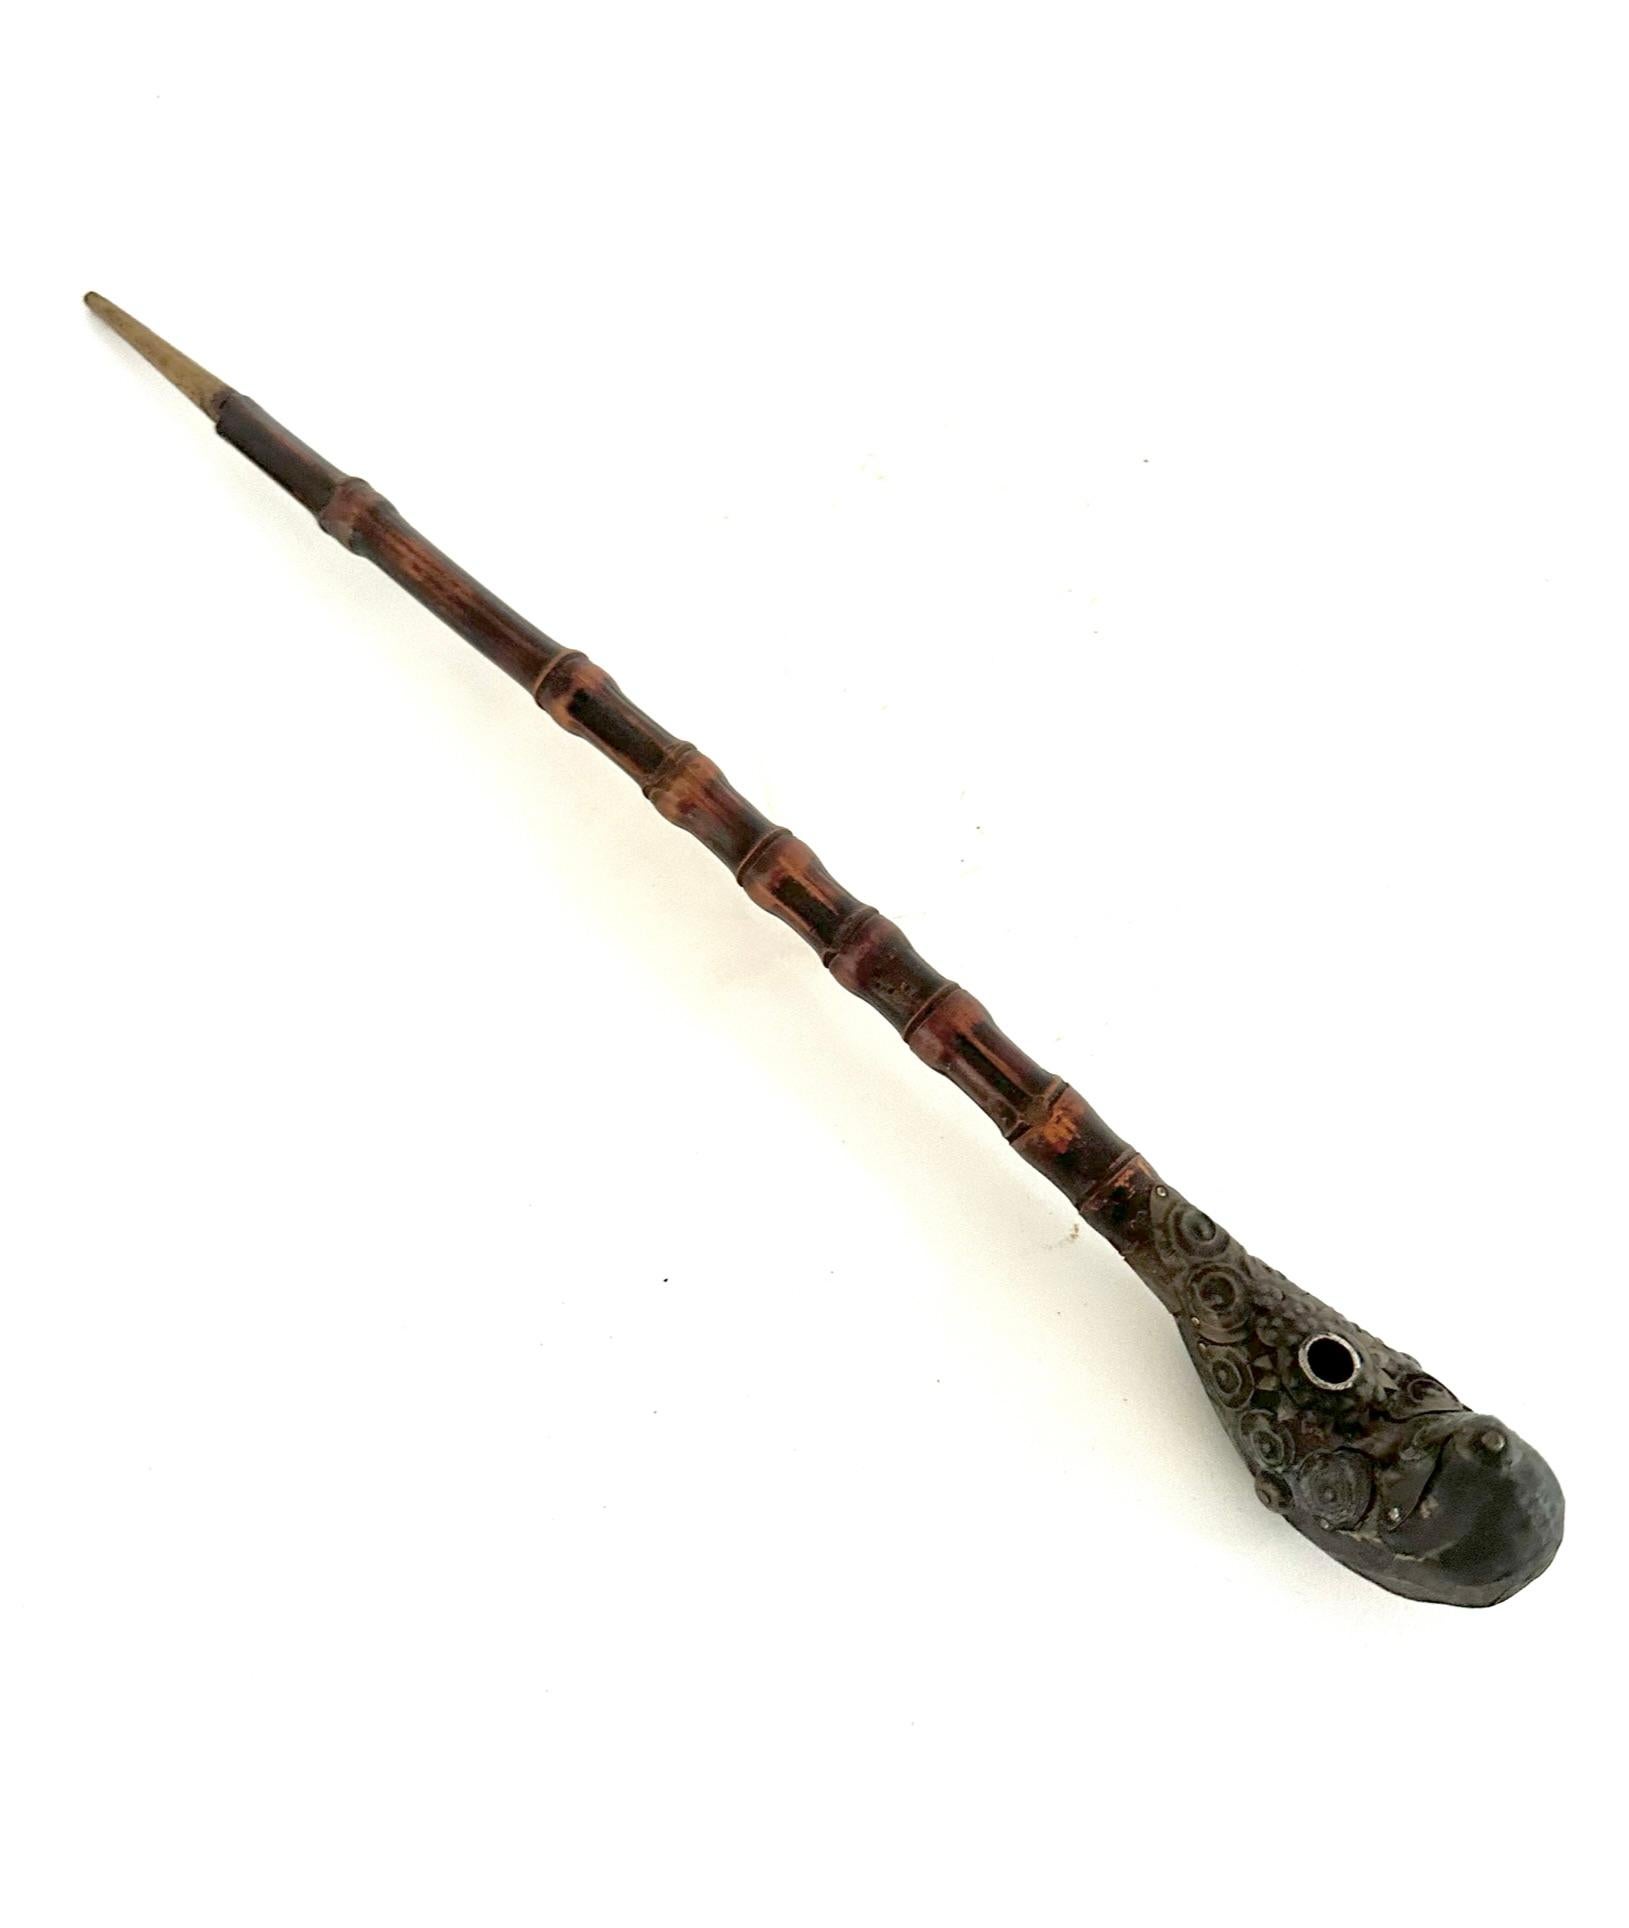 An opium pipe is a pipe designed specifically for the vaporization and inhalation of opium. But these beautiful little antiques have become one-of-a-kind works of art.
This late 19th century pipe is hand crafted from bamboo and brass, the pipe is